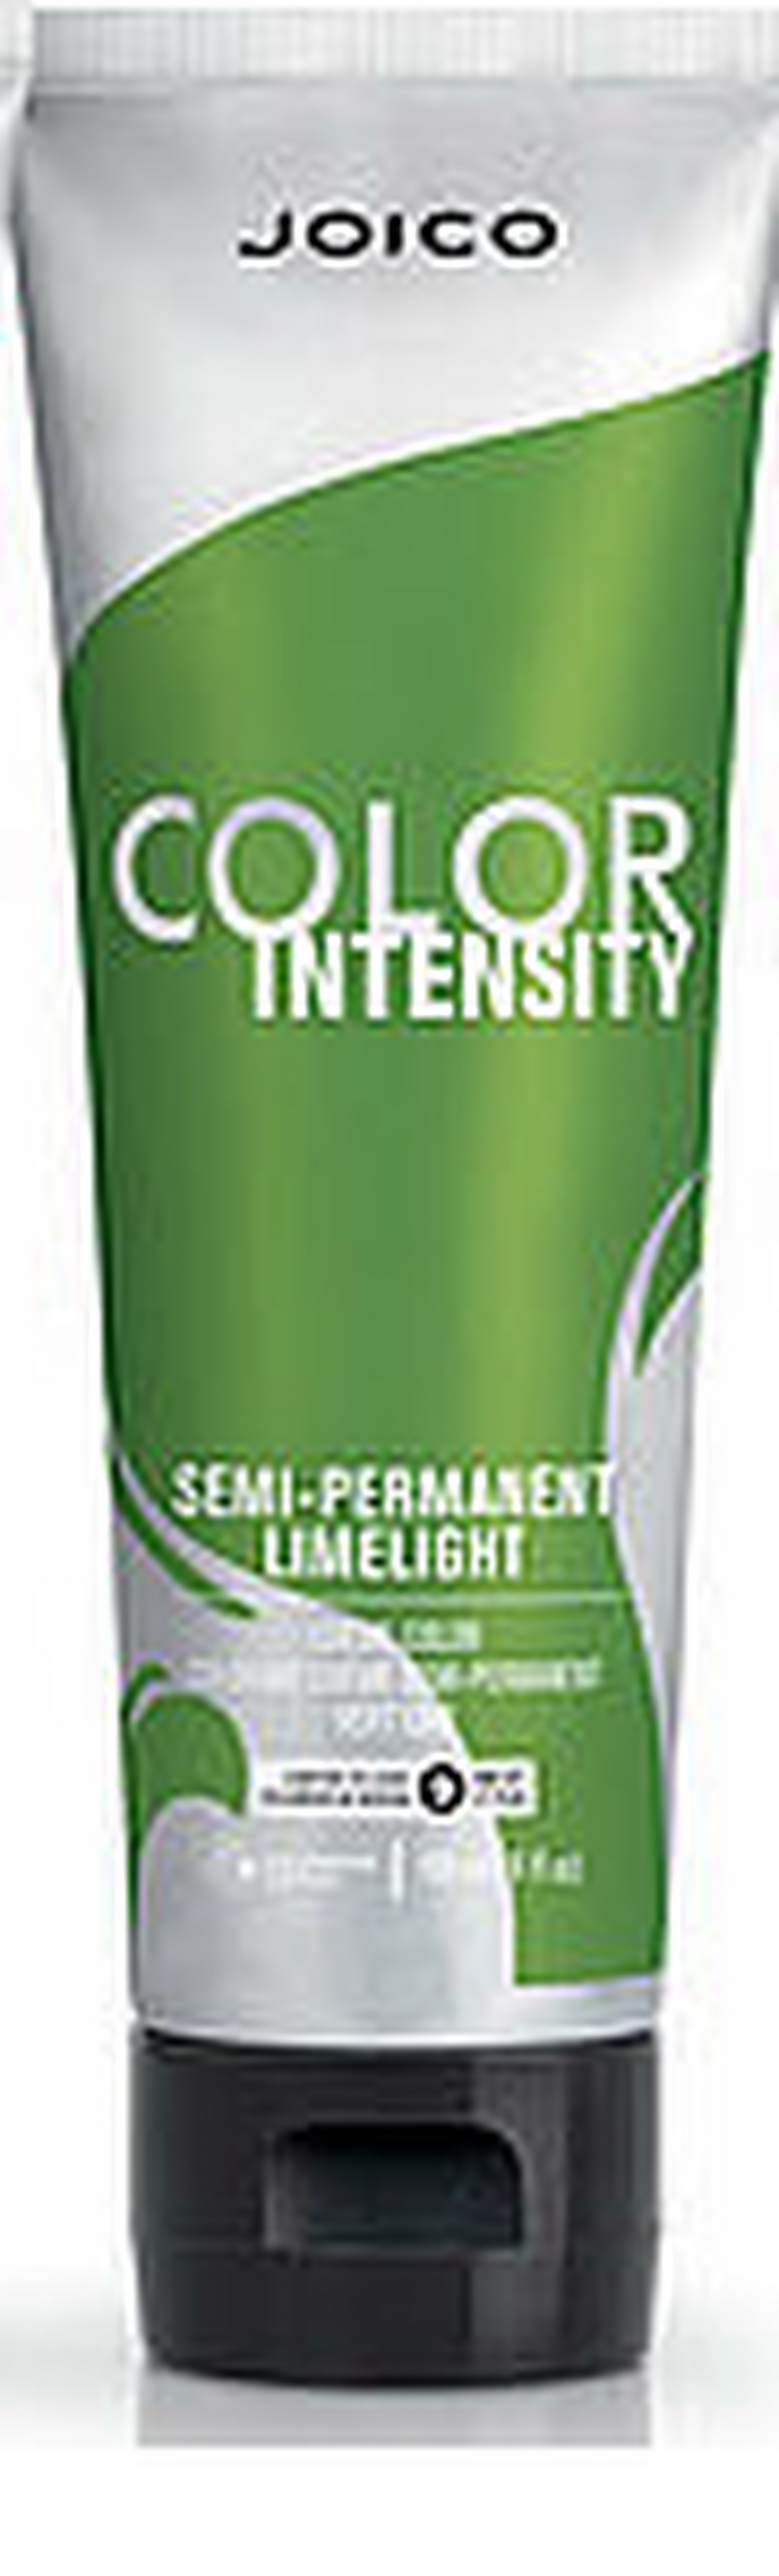 Joico Color Intensity - Limelight 118ml